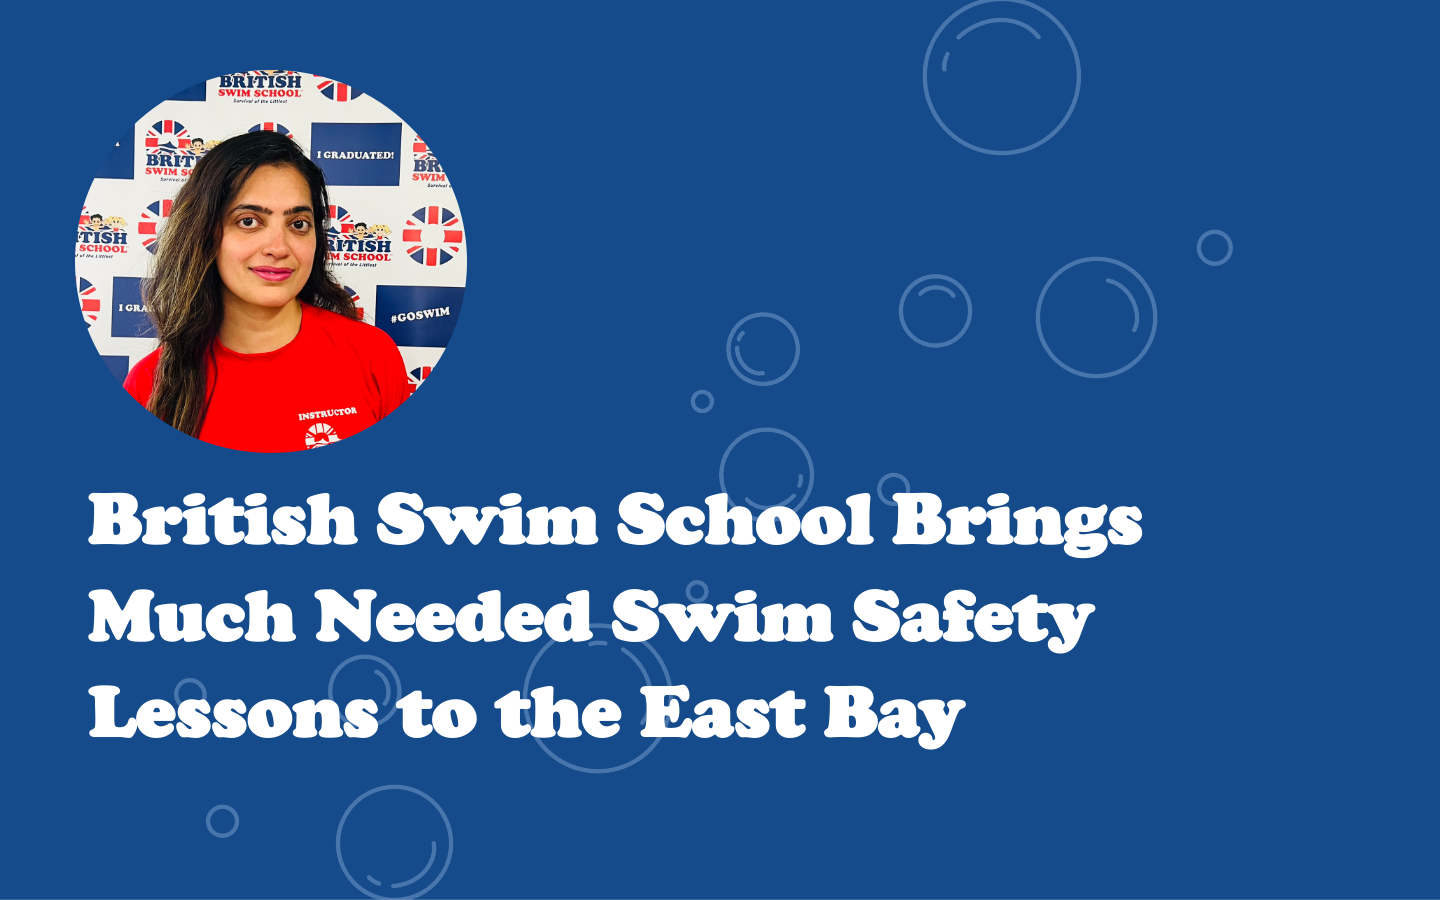 Image of British Swim School Brings Much Needed Swim Safety Lessons to the East Bay